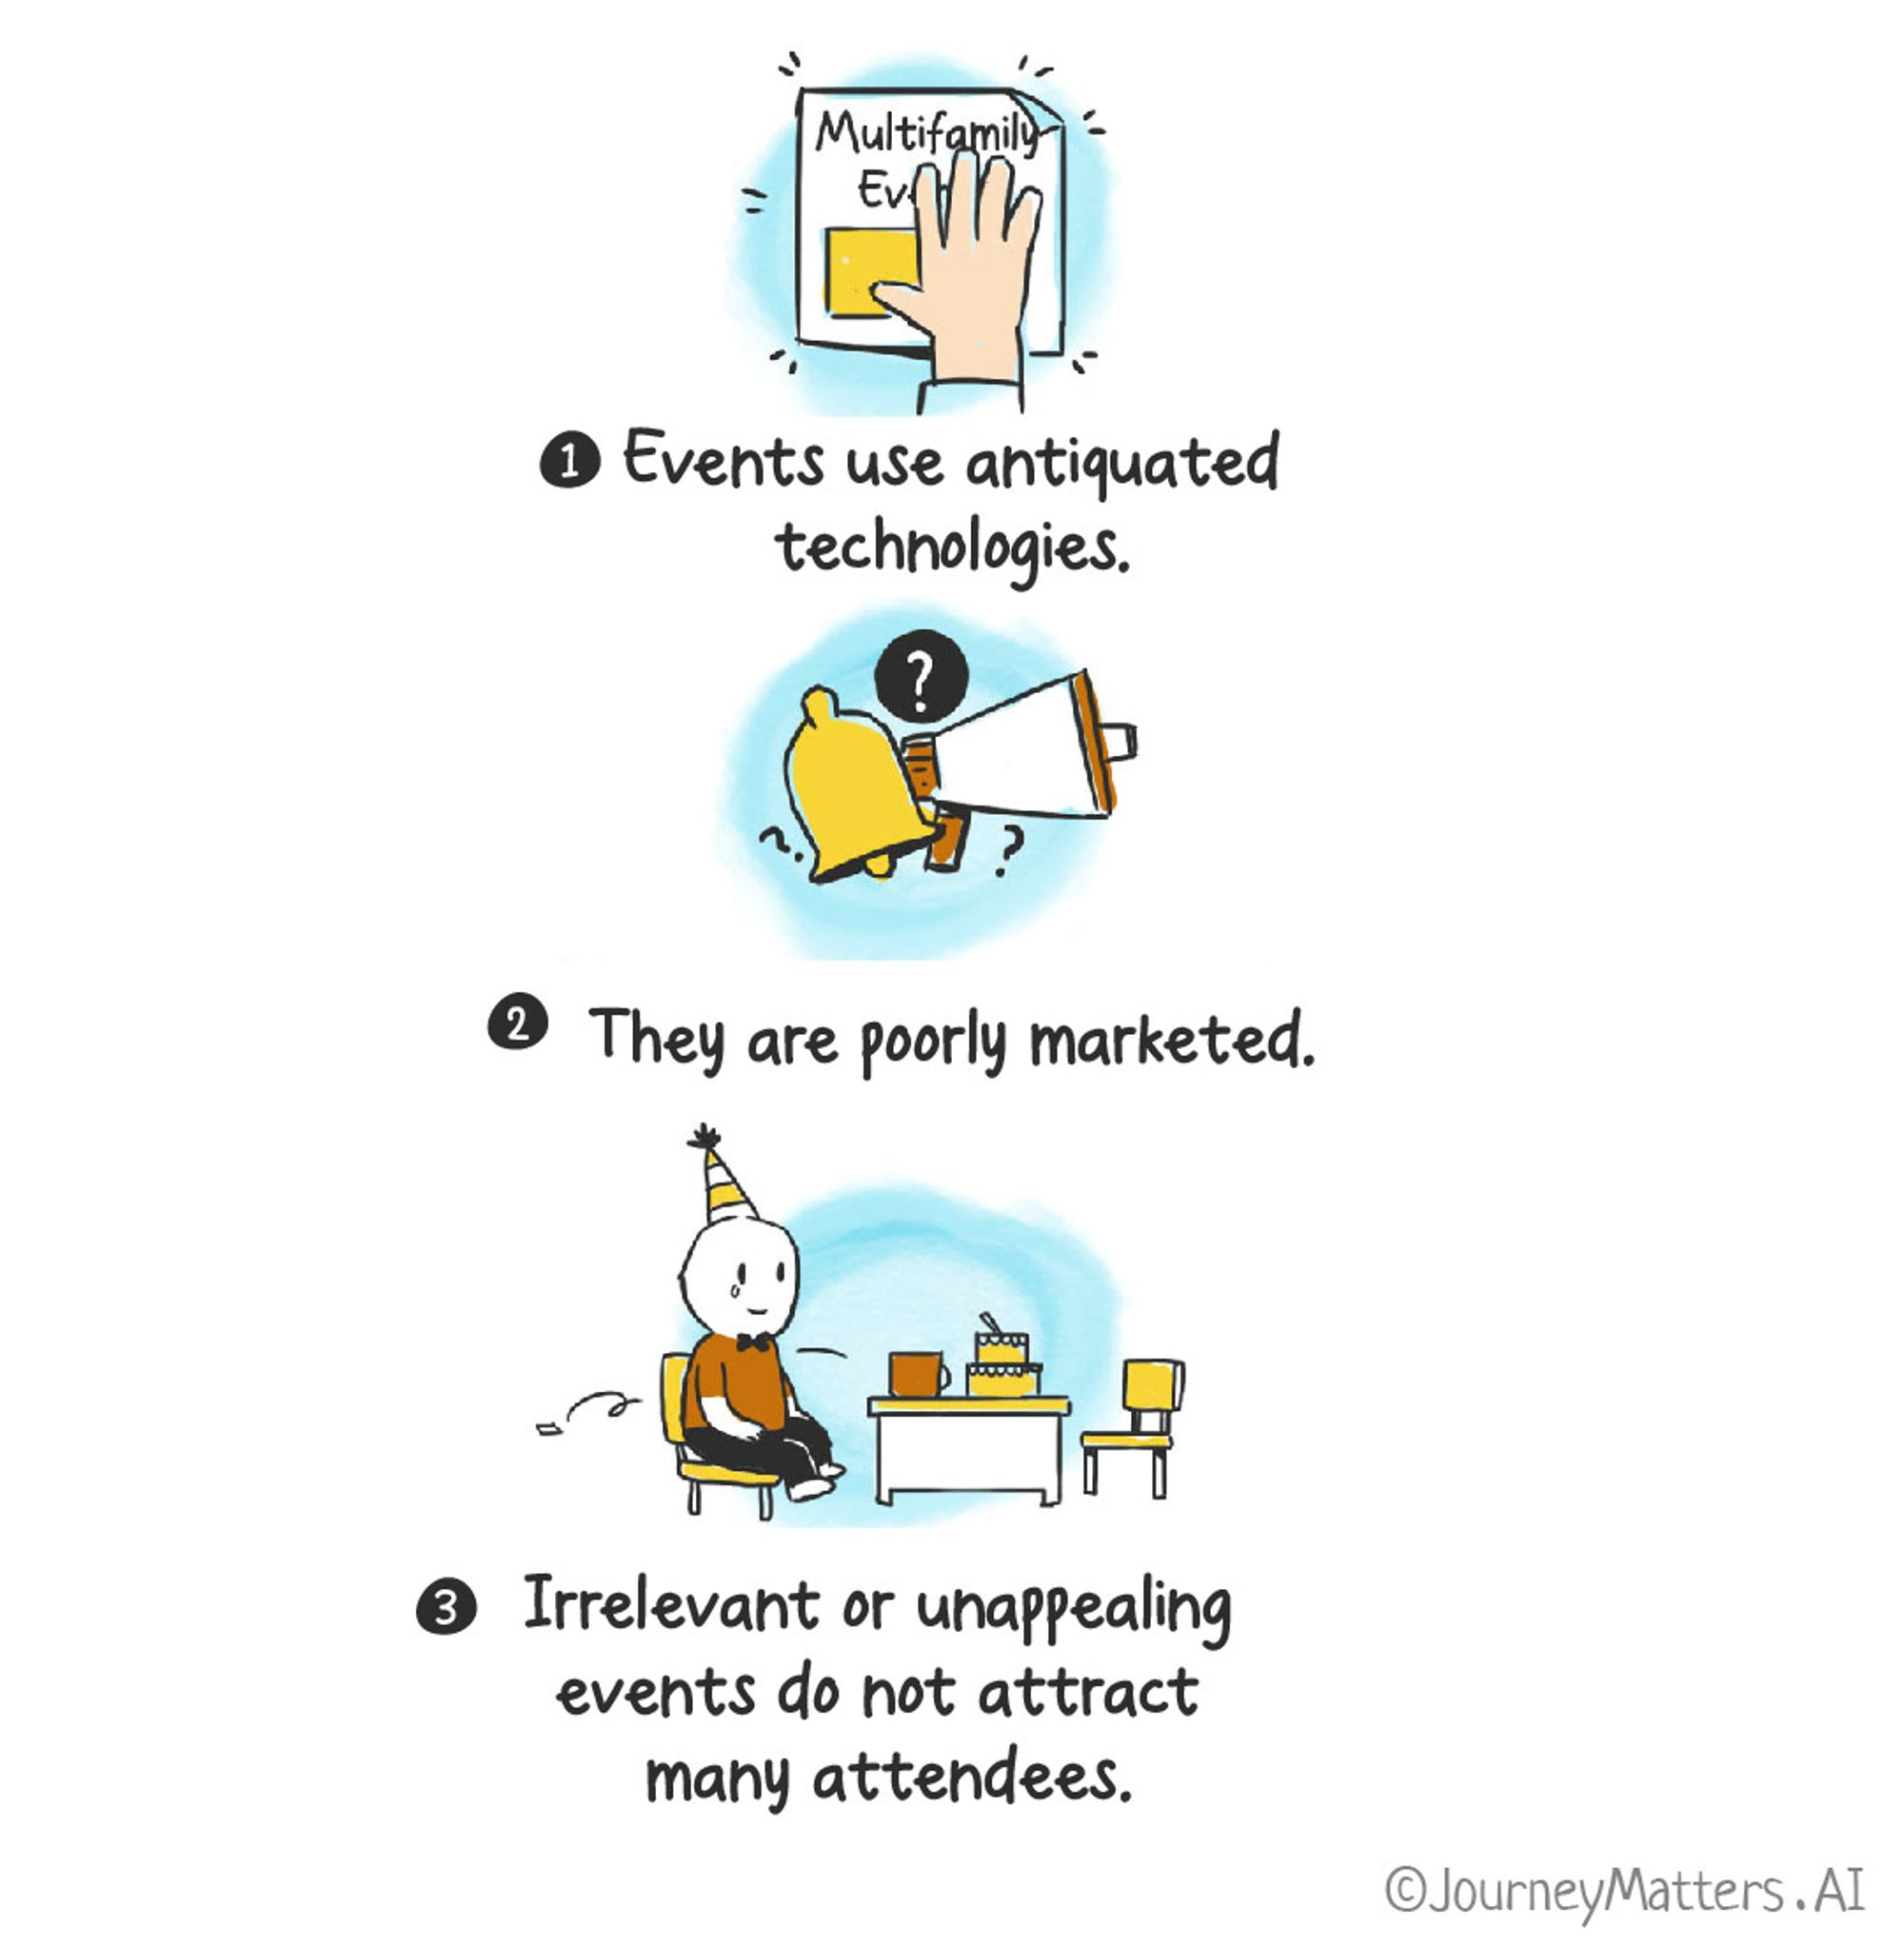 Multifamily events have low attendance because they are poorly marketed using antiquated technology.